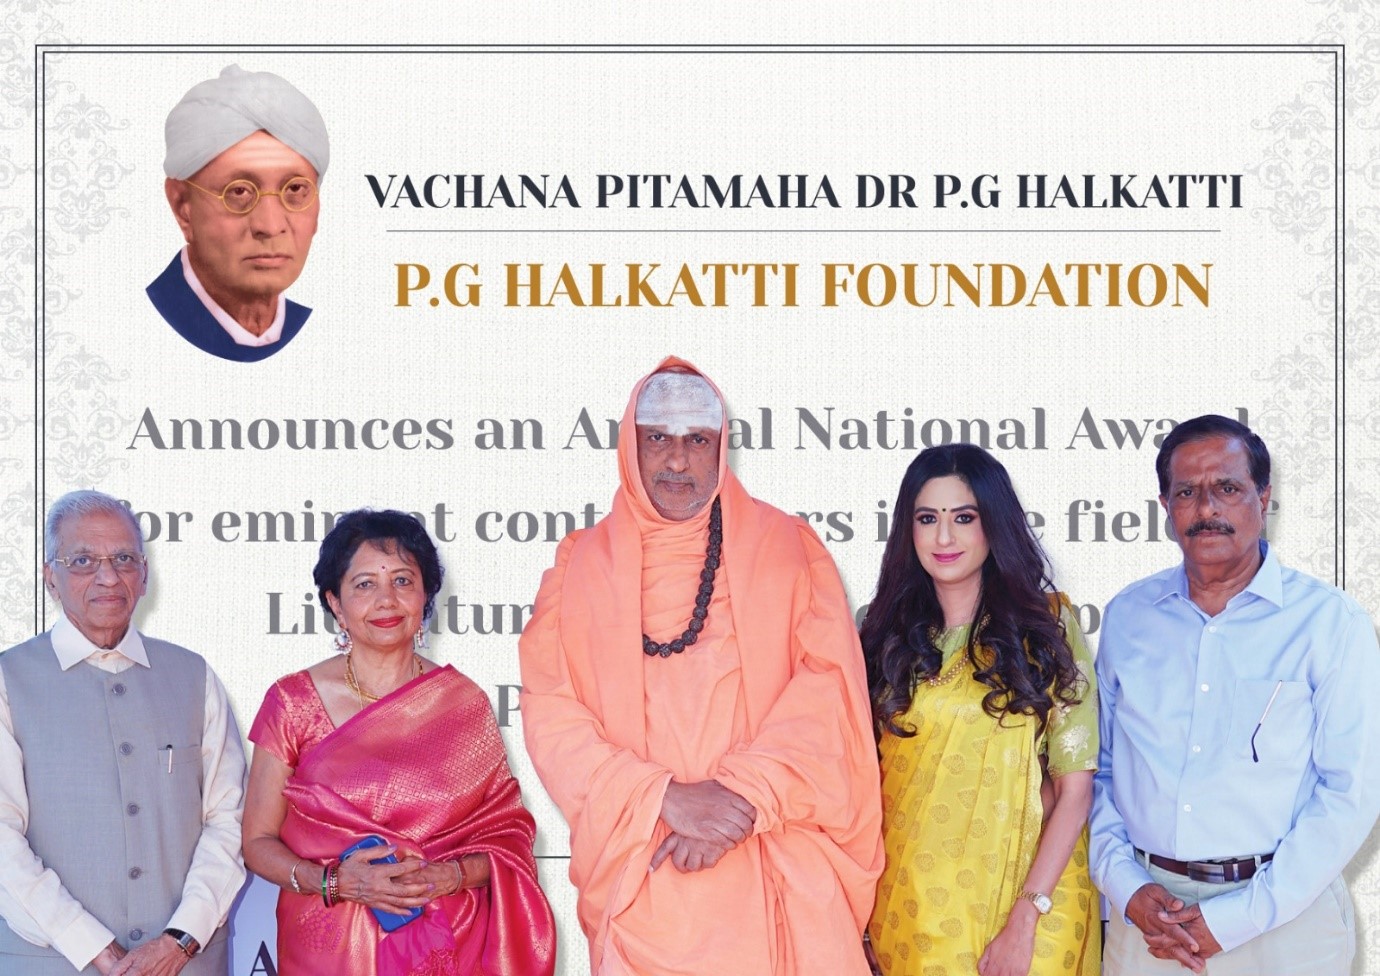 Pavithra Halkatti President of Dr. P.G. Halkatti Foundation announces an Annual National Award for eminent contributors in the field of Literature, Academics & Philanthropy decoding=